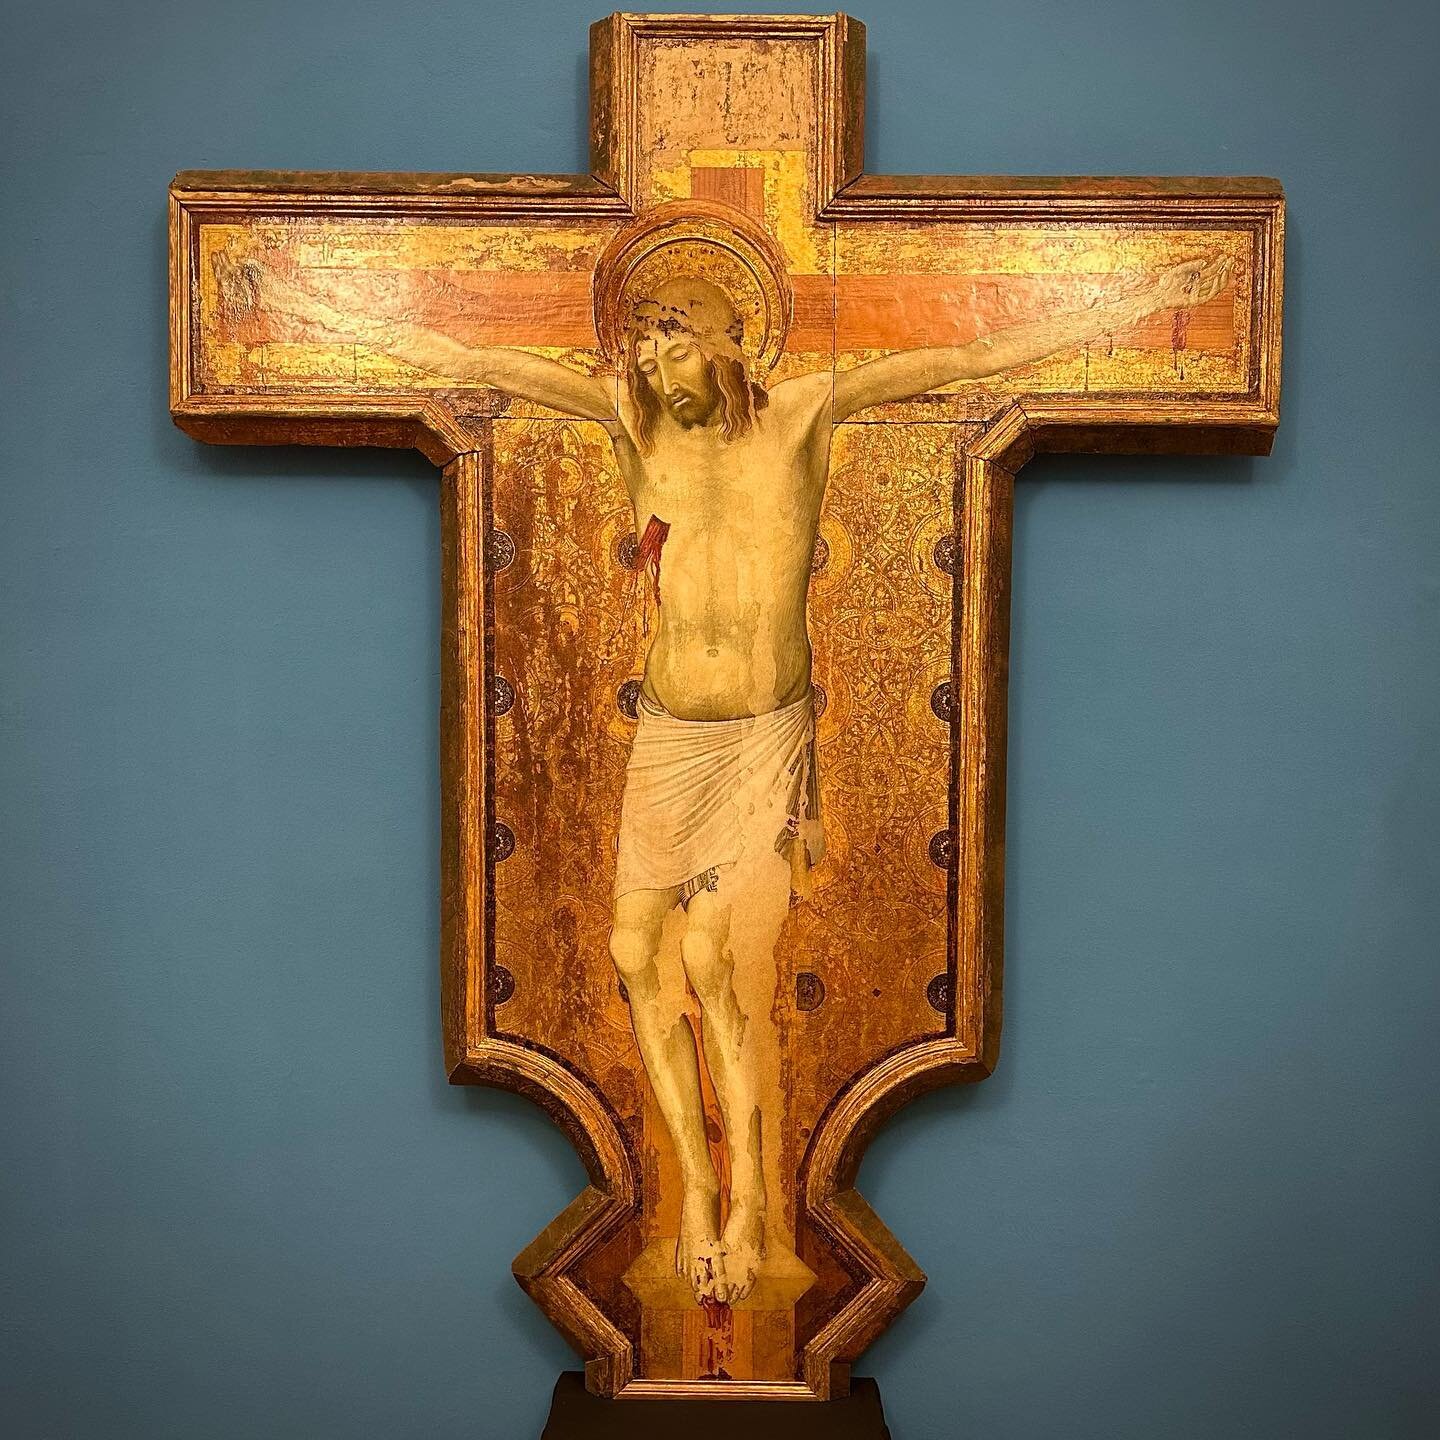 Should you be in Siena before 8 January, be sure to visit the Pinacoteca to see Ambrogio Lorenzetti&rsquo;s newly restored Crucifix, back in the spotlight after many years. It dates to ca. 1328-30 and was in the Carmelite church for which, incidental